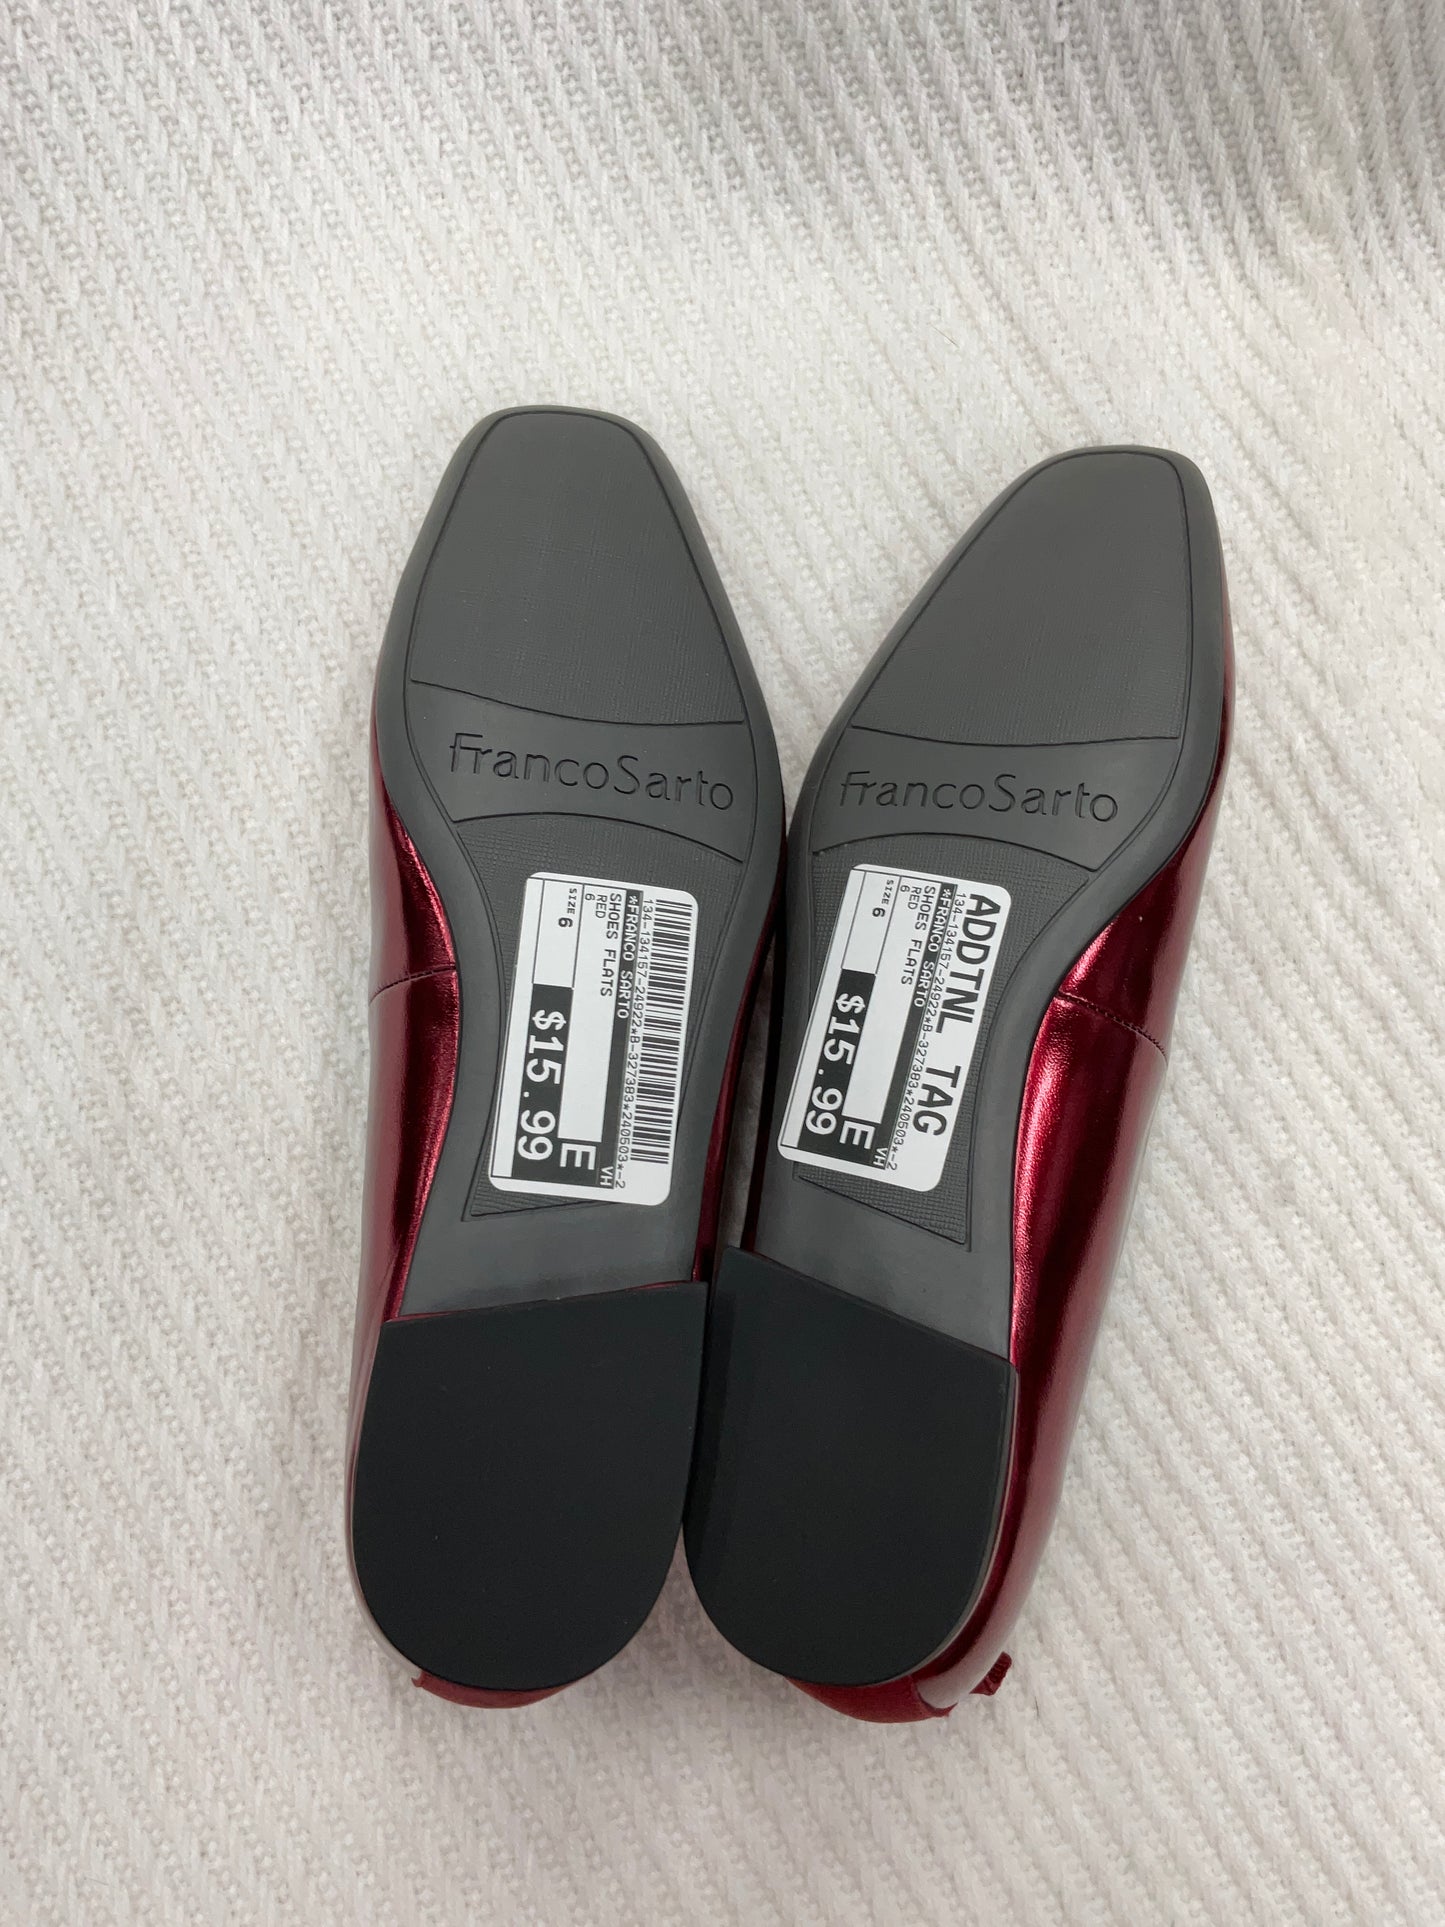 Shoes Flats By Franco Sarto  Size: 6